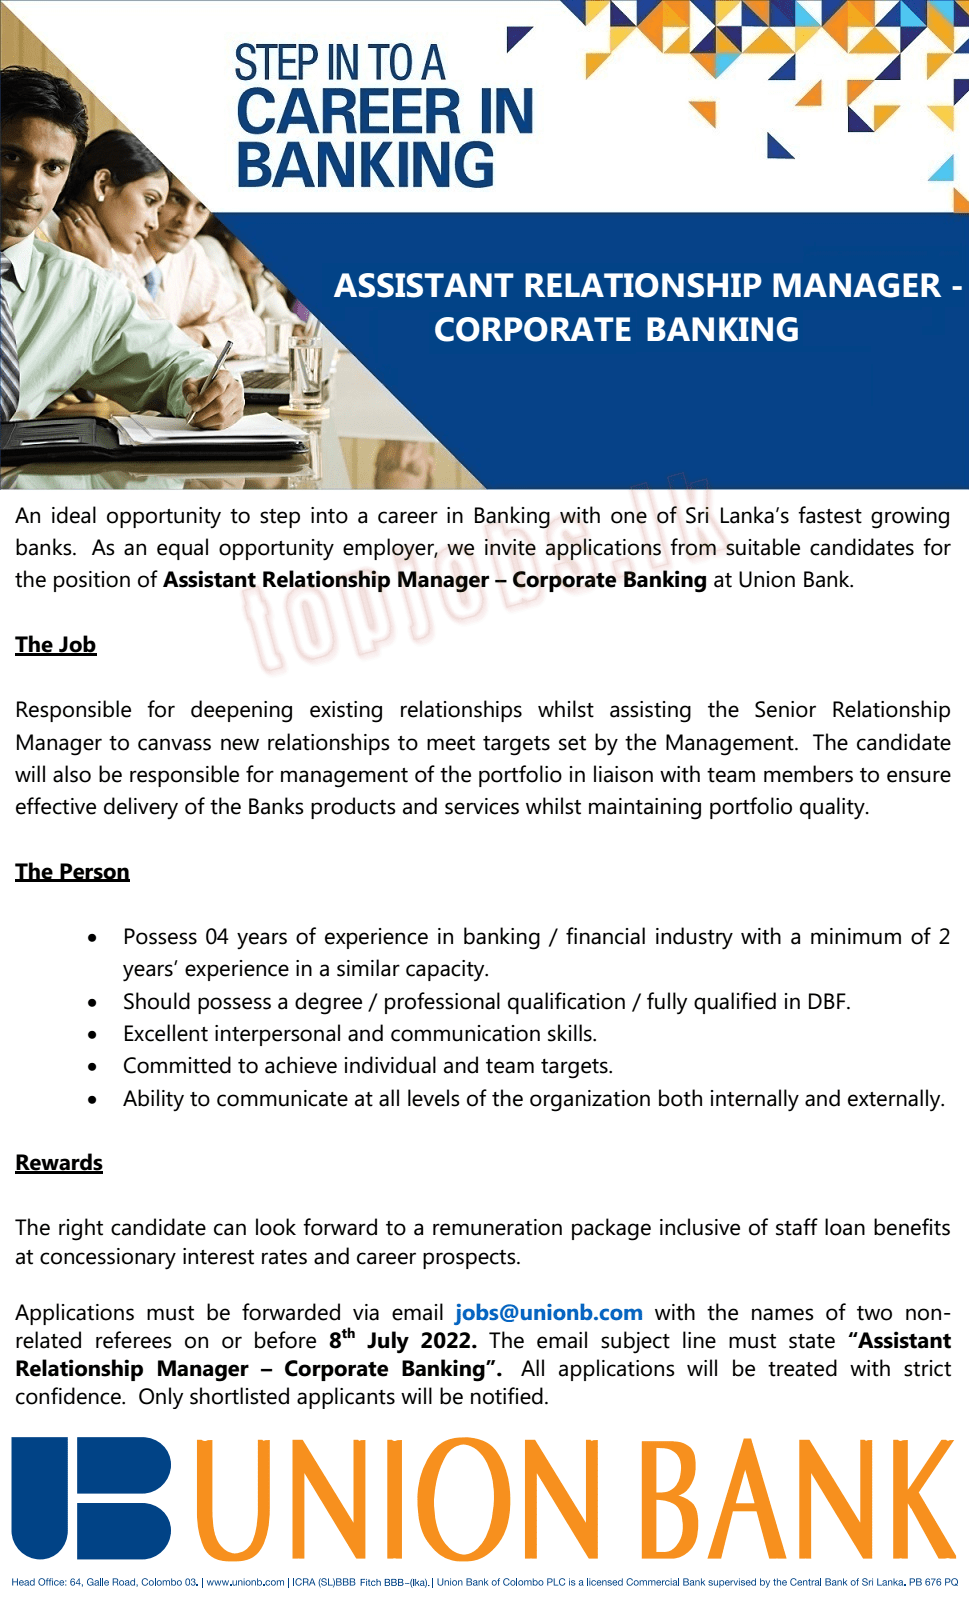 Assistant Relationship Manager (Corporate Banking) - Union Bank Jobs Vacancies